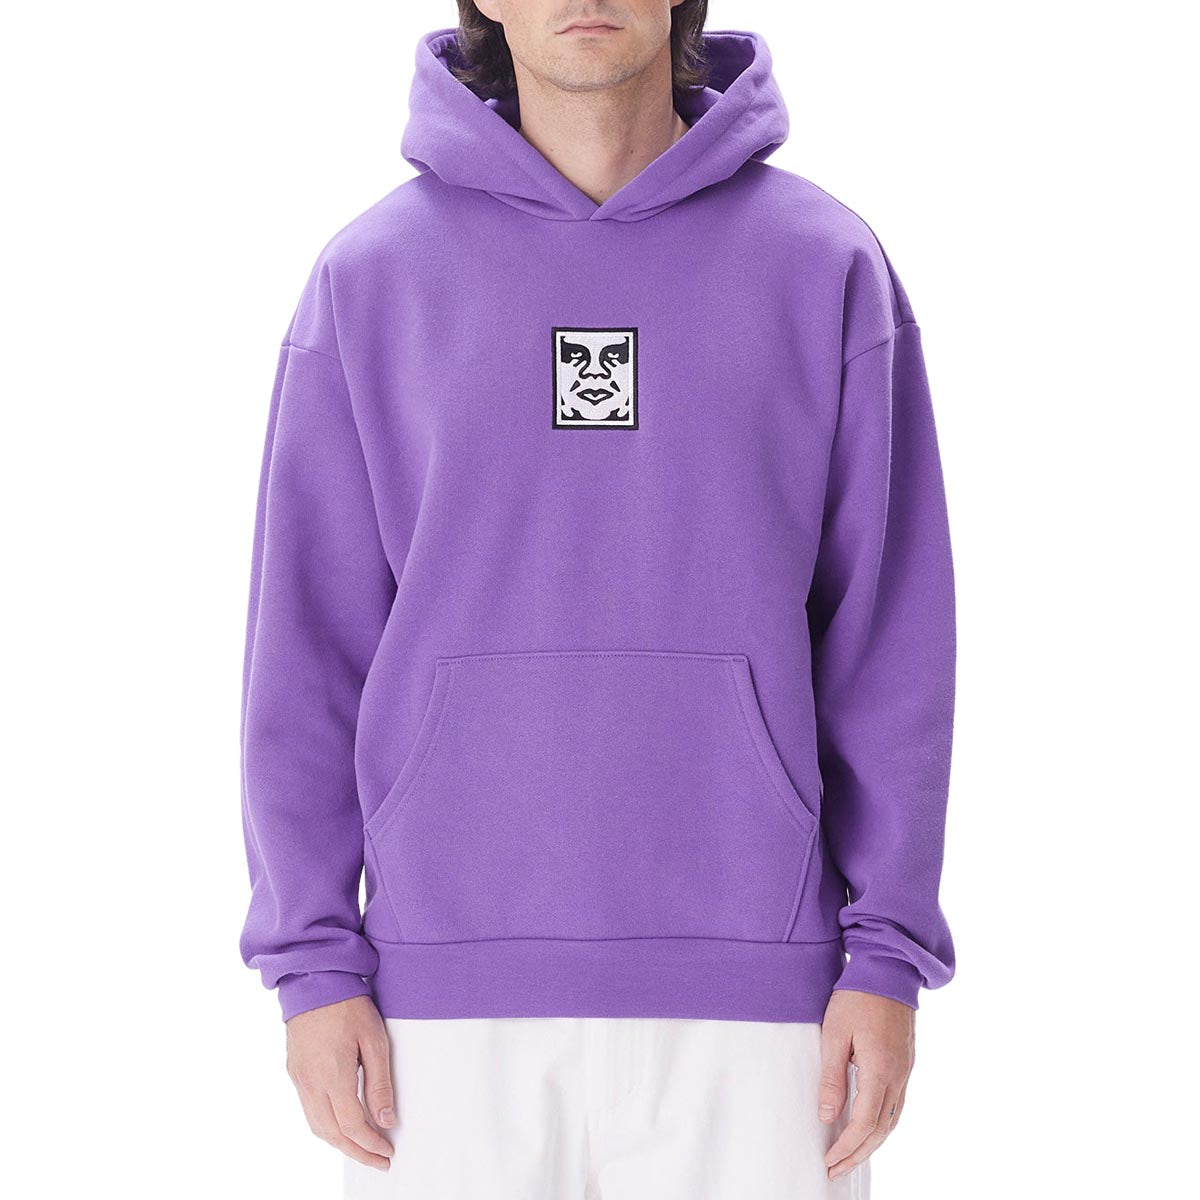 Obey Tbd Hoodie - Passion Flower image 1